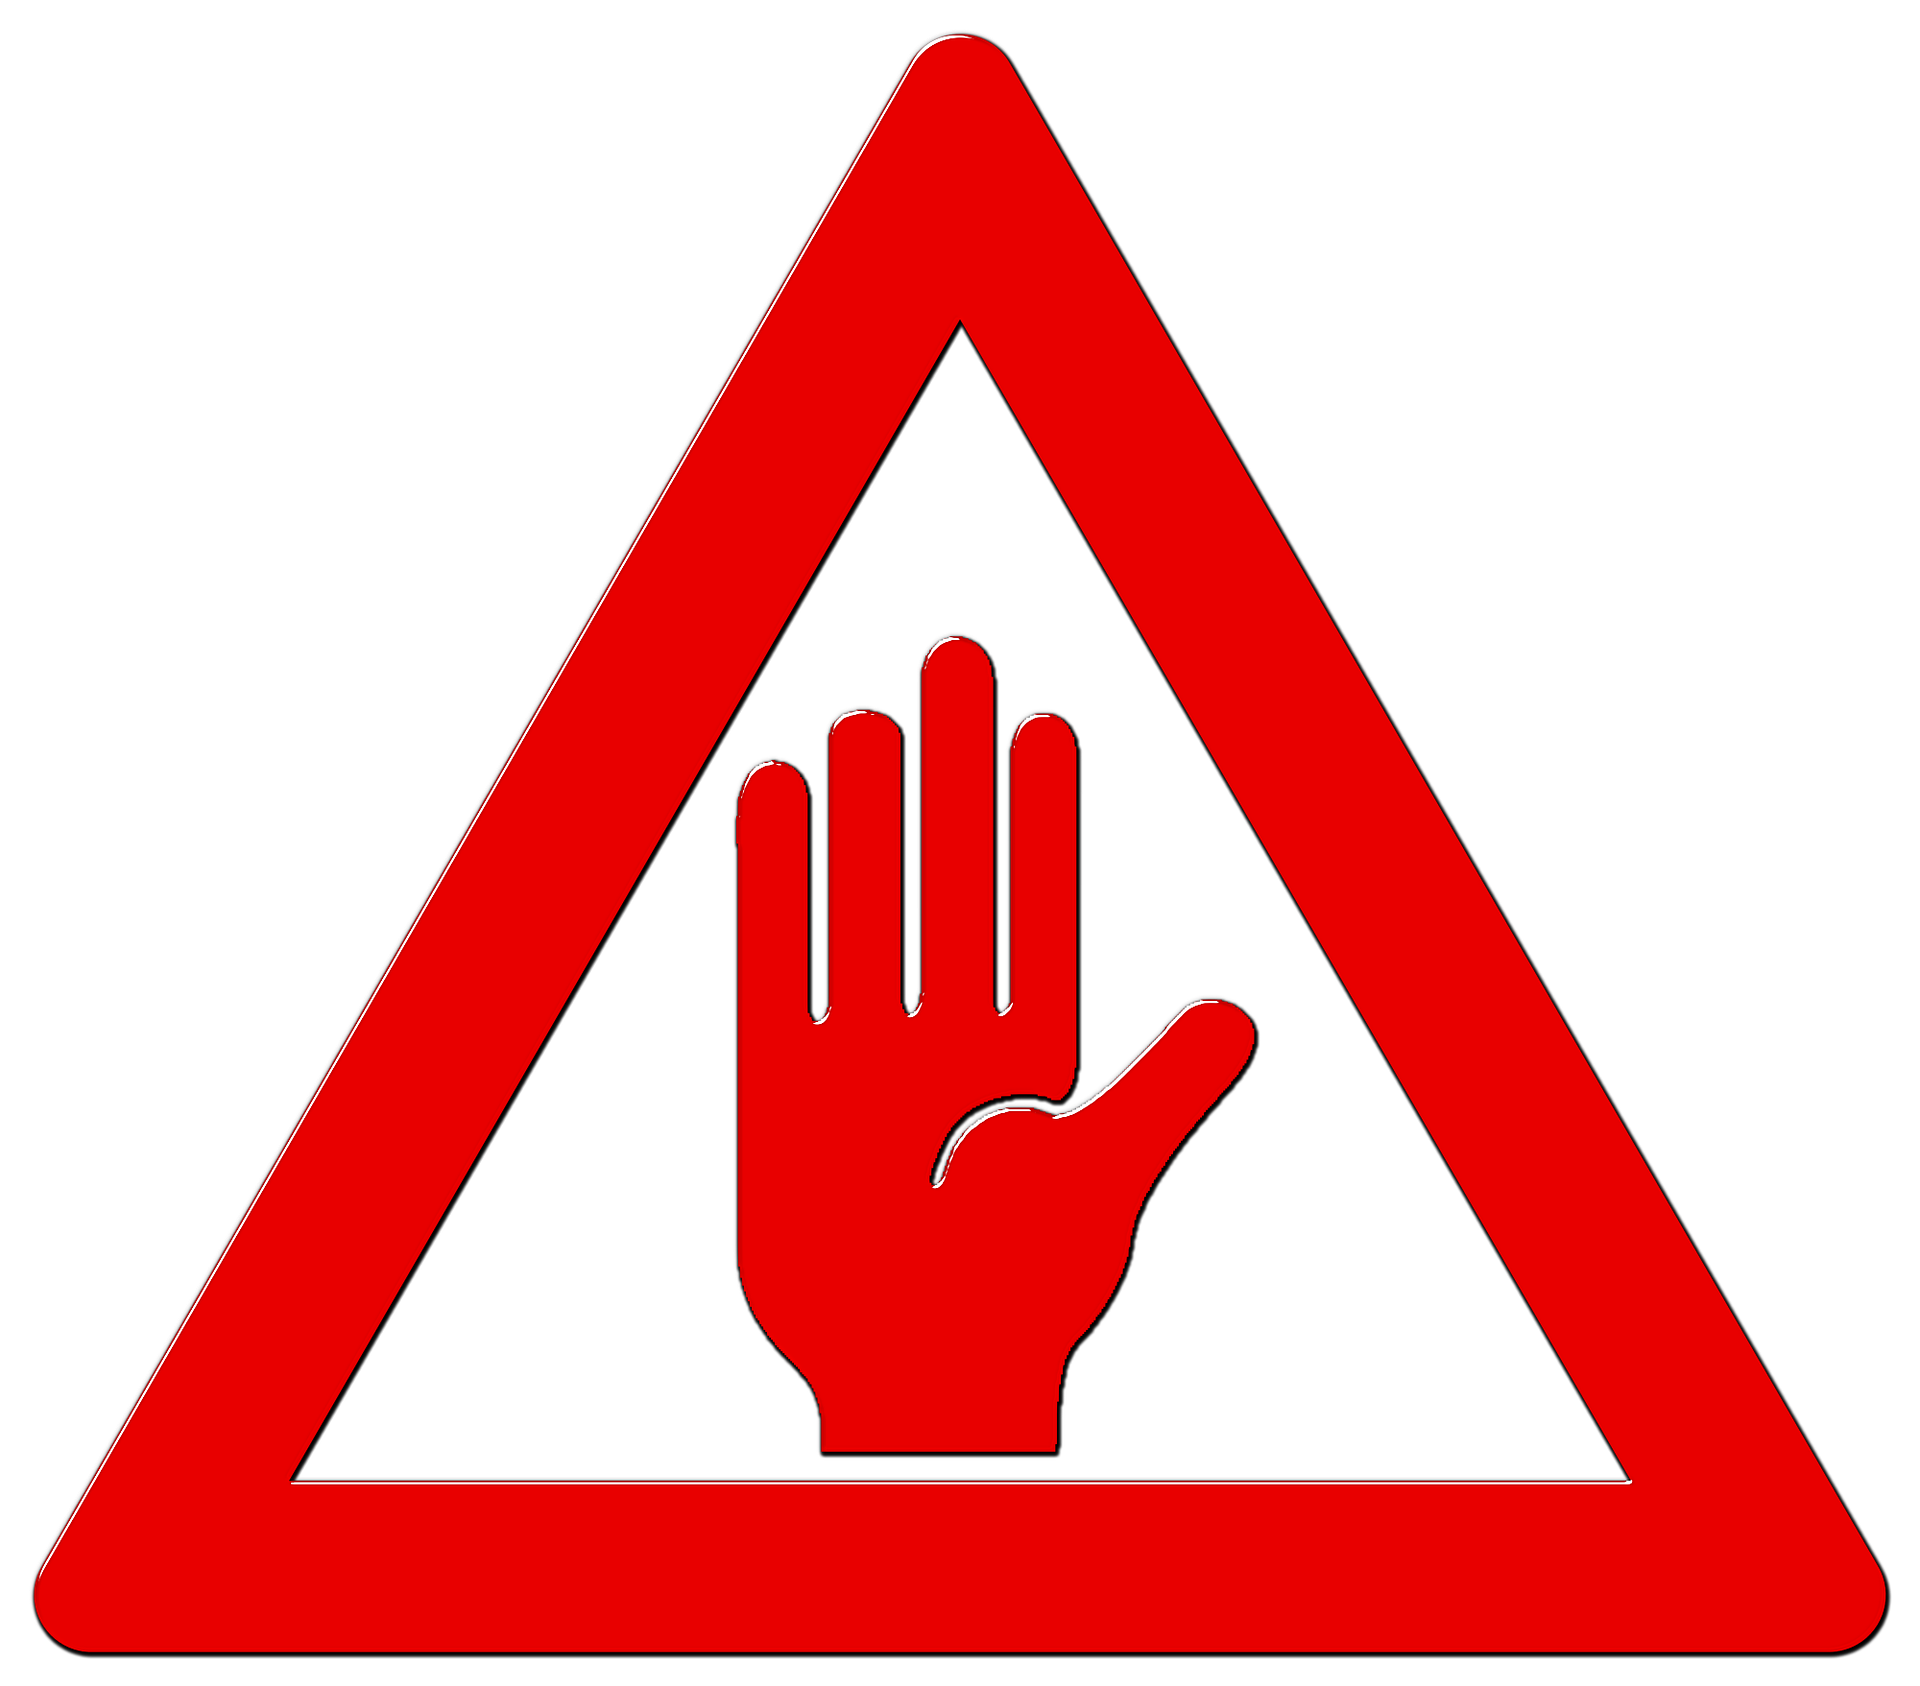 road-sign-464643_1920.png